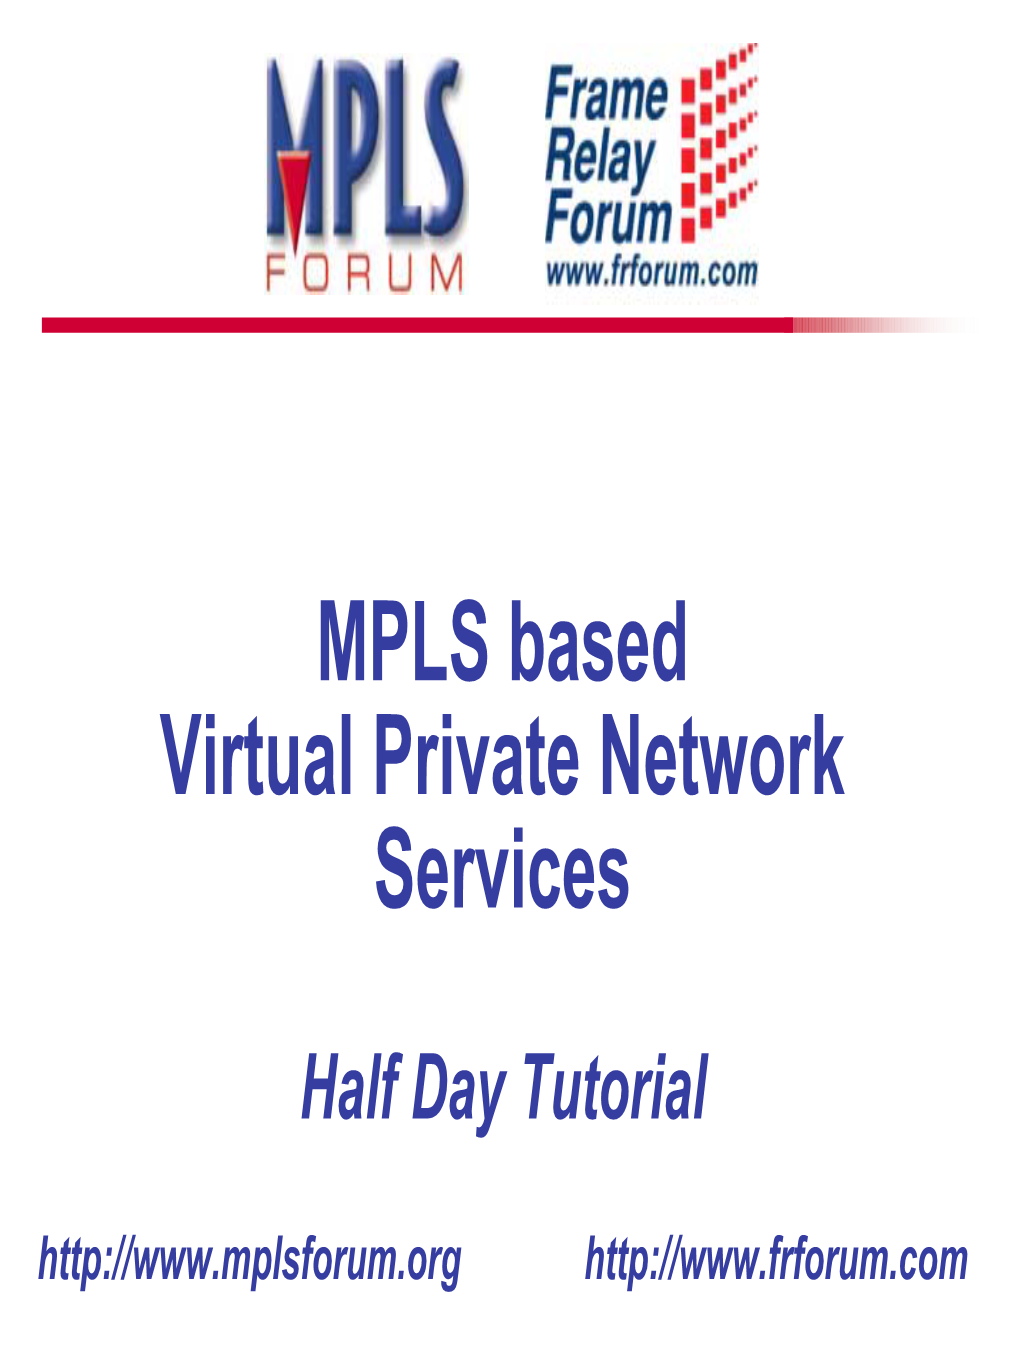 MPLS Based Virtual Private Network Services